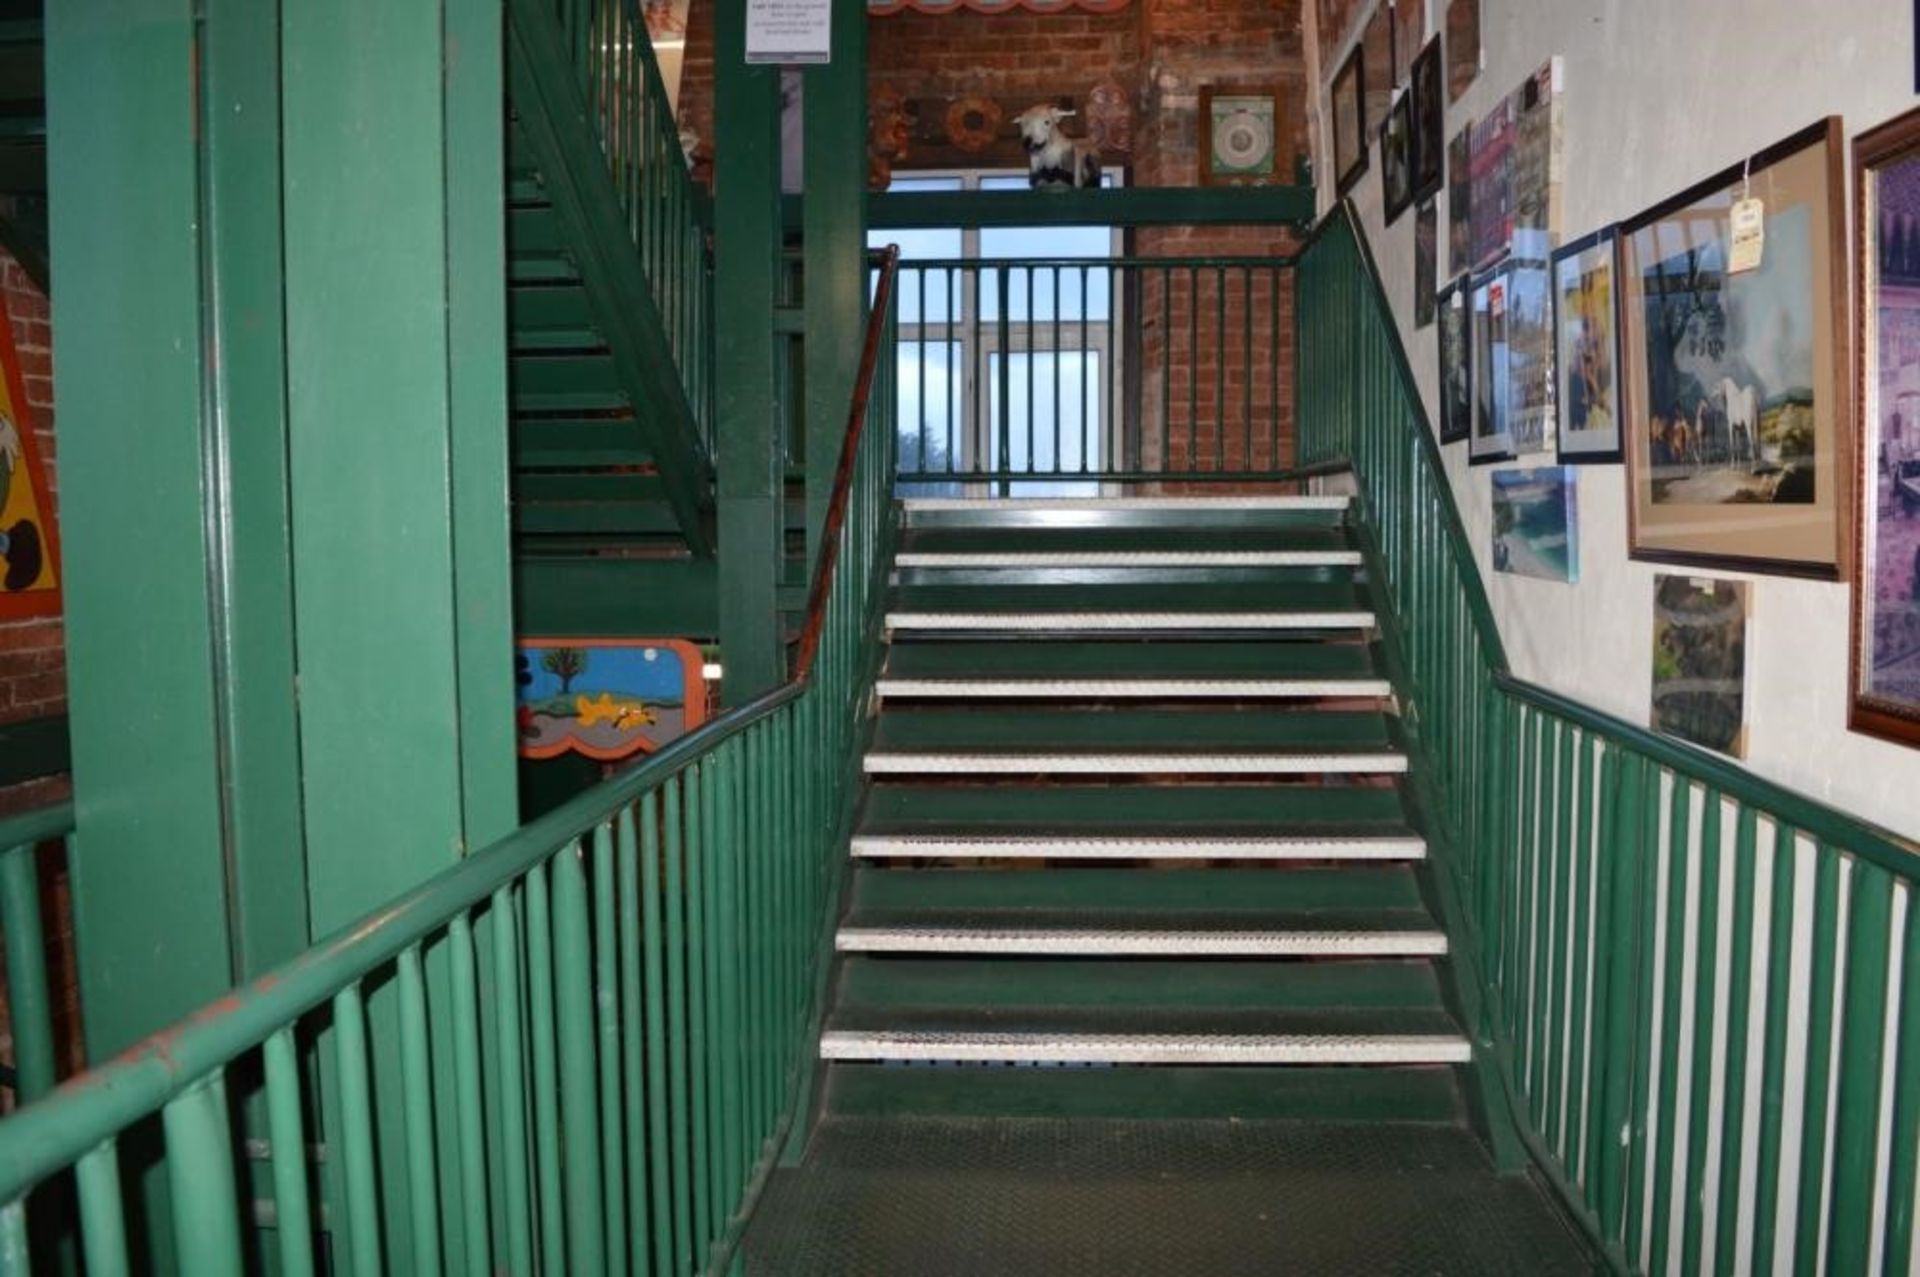 Botany Bay Heavy Duty Steel Customer Stairway - Covers Five Floors with an Overall Height of Approx - Image 29 of 30